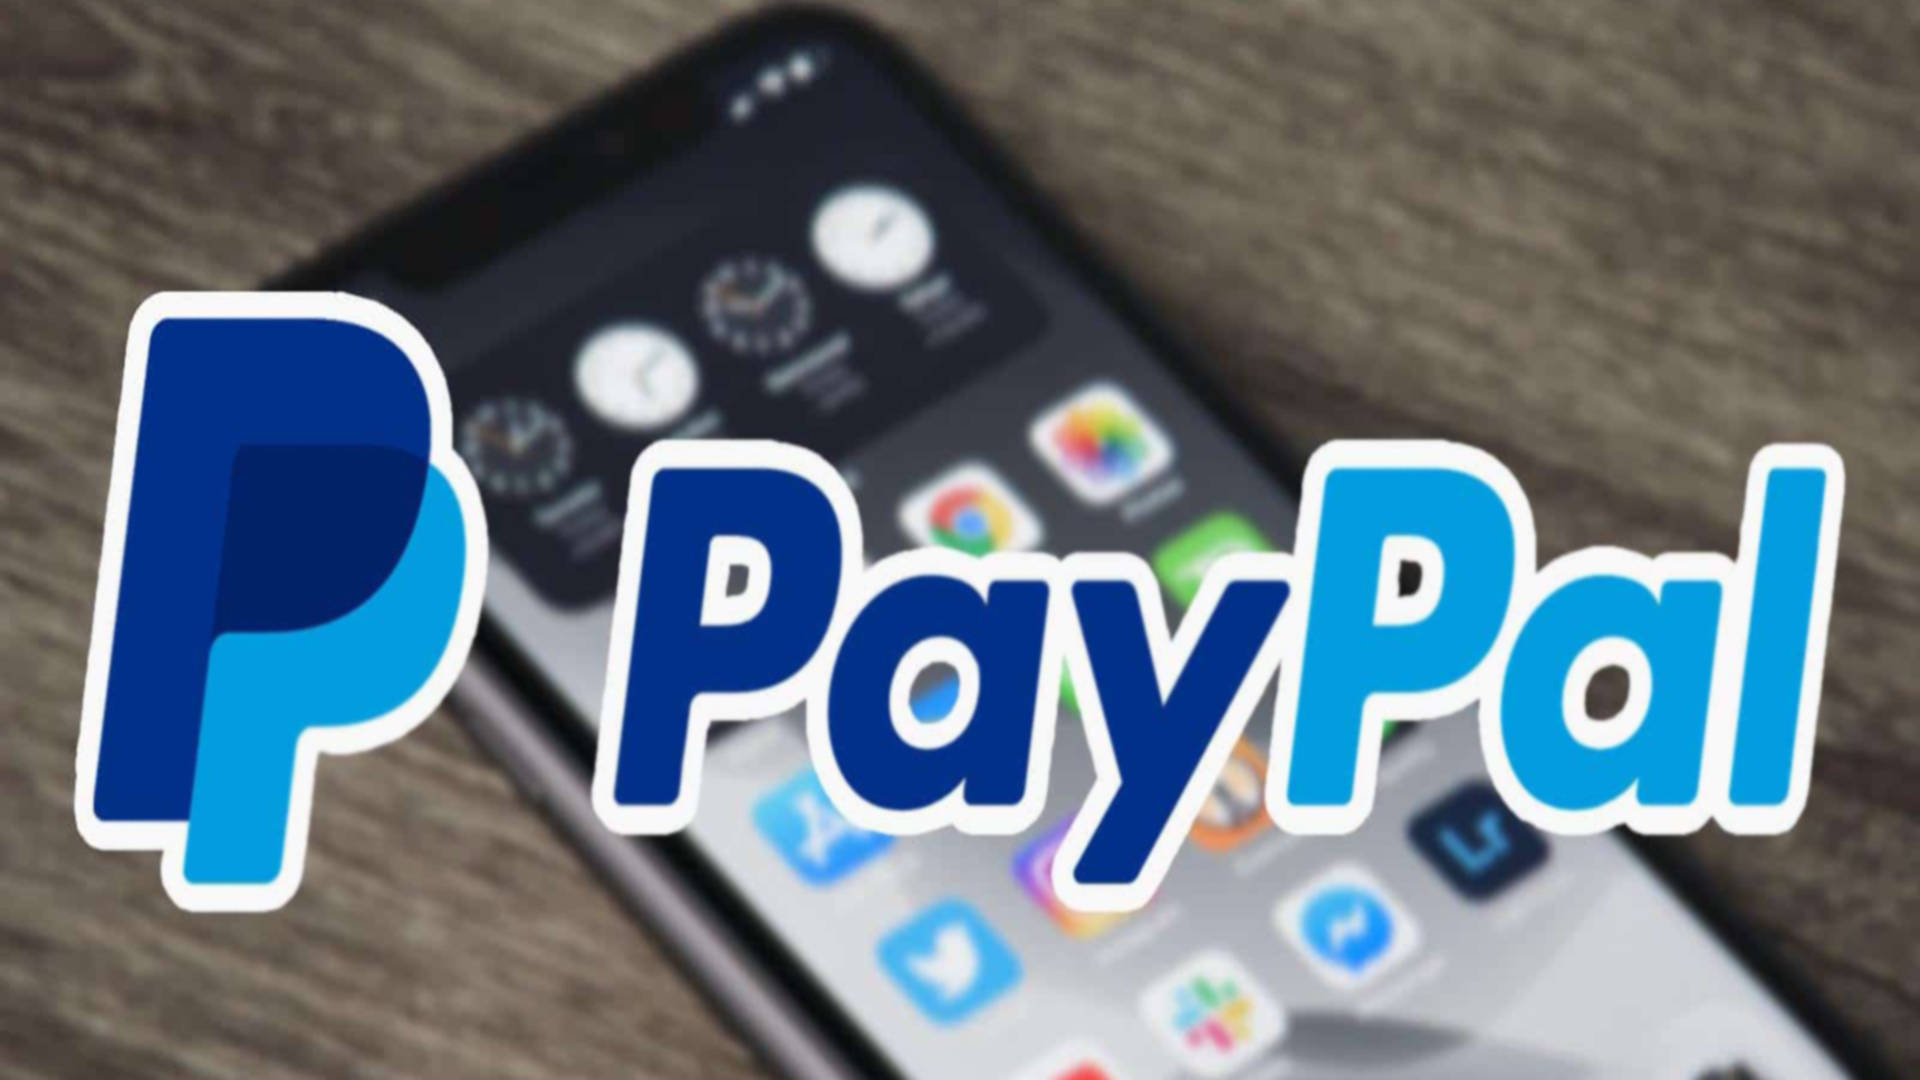 Paypal Logo With Phone Background